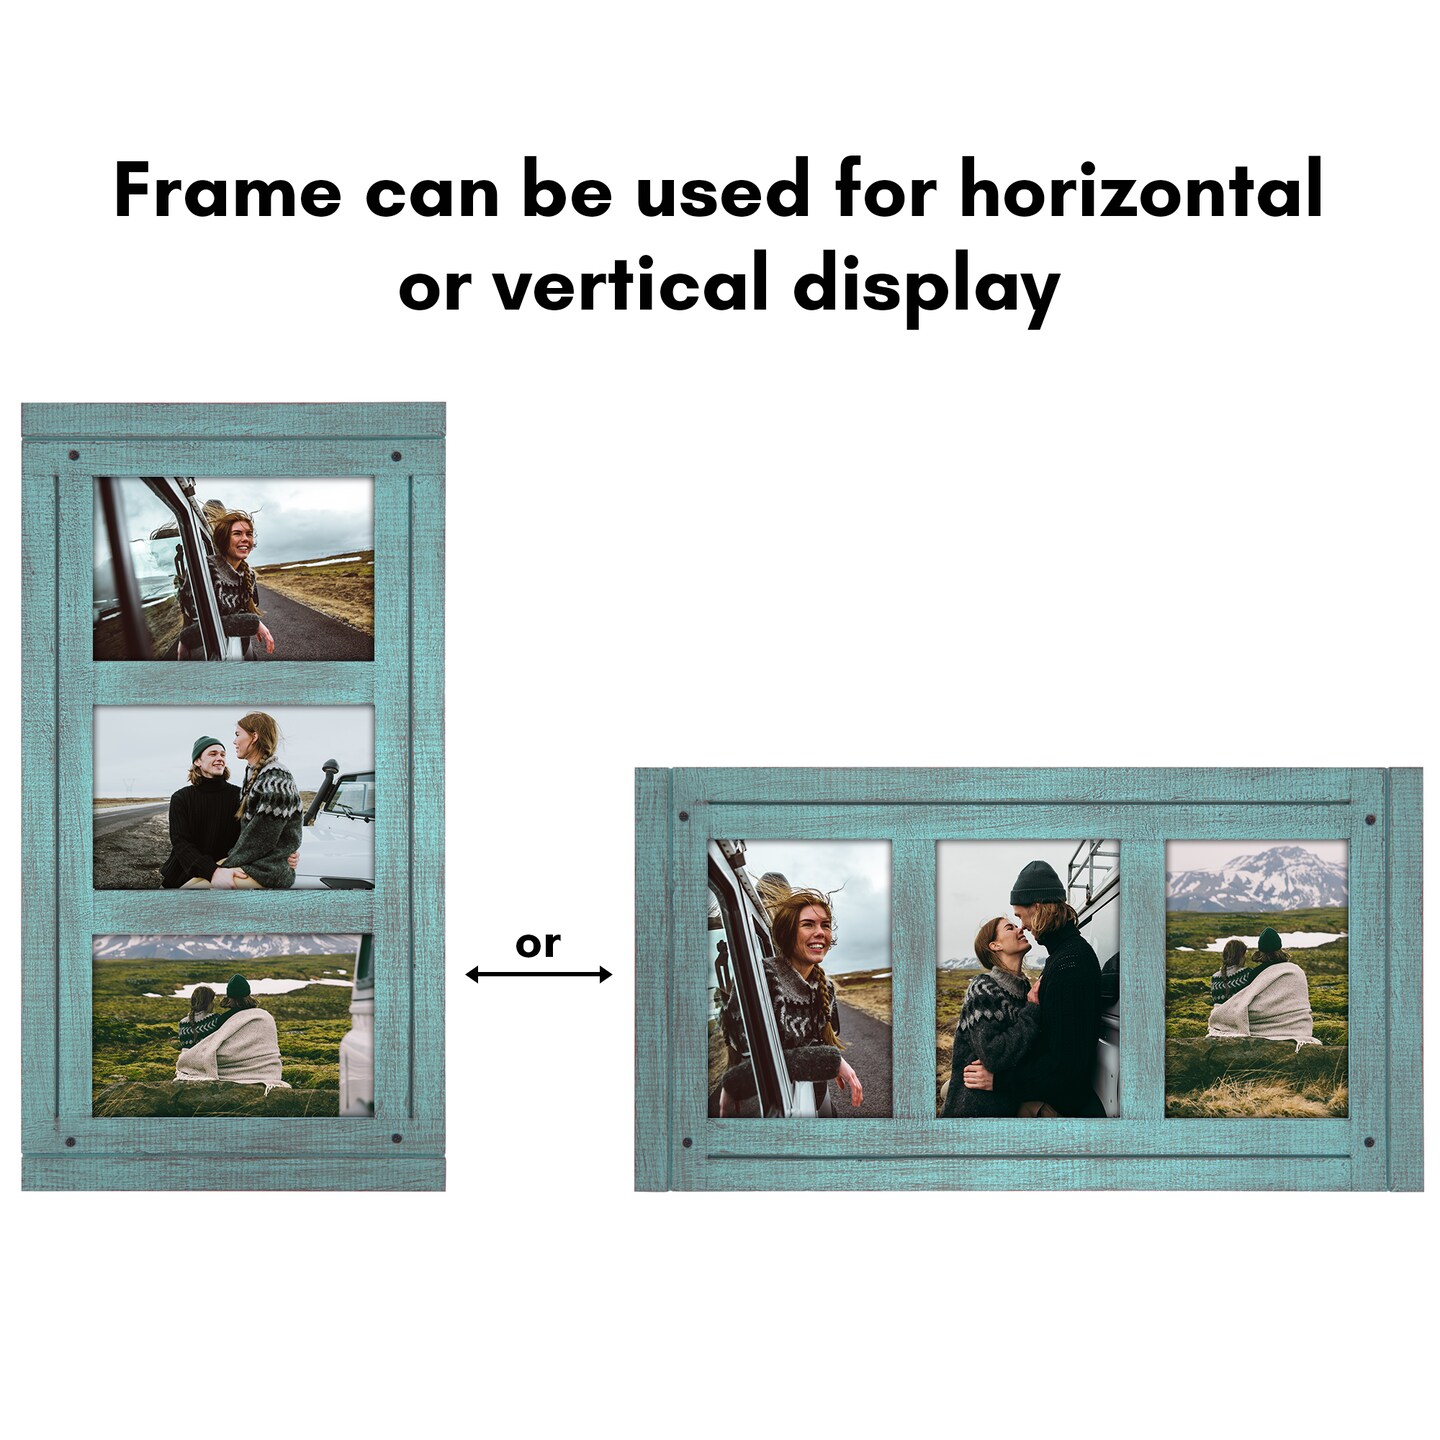 Americanflat 4x6 Tri-Photo Frame - Showcases Three 4x6 Photos at Once - Picture Frame for Western Home Decor - Glass Cover - Hanging Hardware - Includes Easel